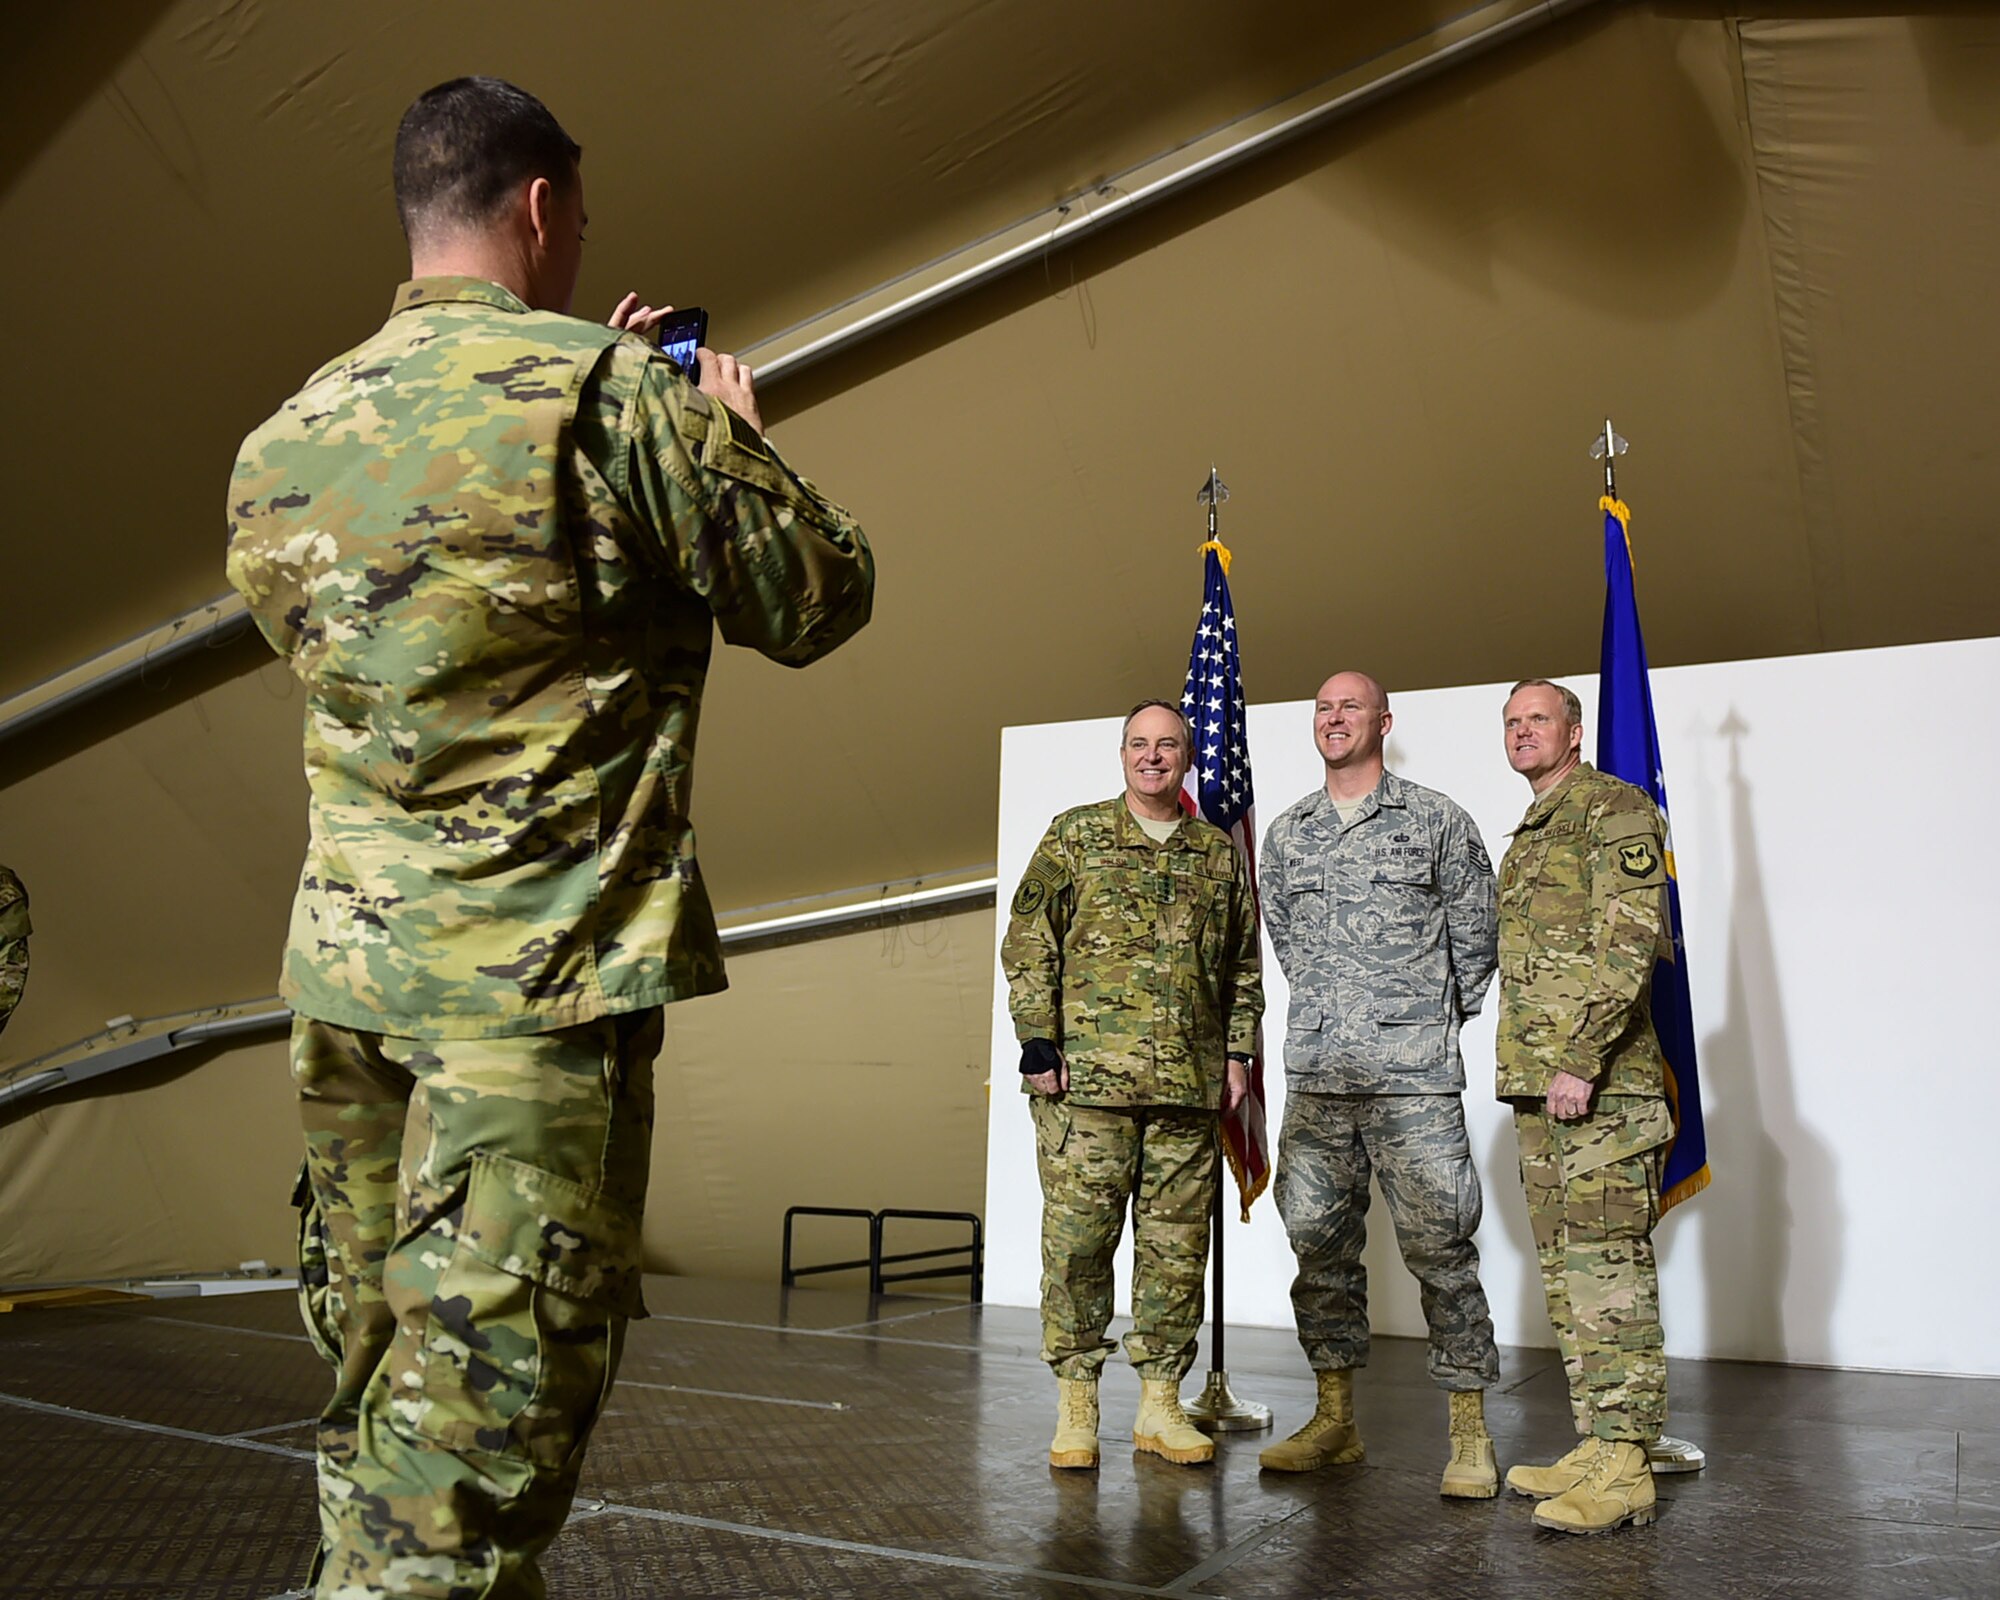 Air Force Chief of Staff Gen. Mark A. Welsh III and Chief Master Sgt. of the Air Force James A. Cody pose for a personal photo with Tech. Sgt. Adam West, from the 332nd Expeditionary Force Support Squadron, during a visit to an undisclosed location in Southwest Asia Dec. 10, 2015. During their visit Welsh and Cody hosted an all-call during which they fielded questions about deployments, manning and sustaining the force. (U.S. Air Force photo by Staff Sgt. Jerilyn Quintanilla)